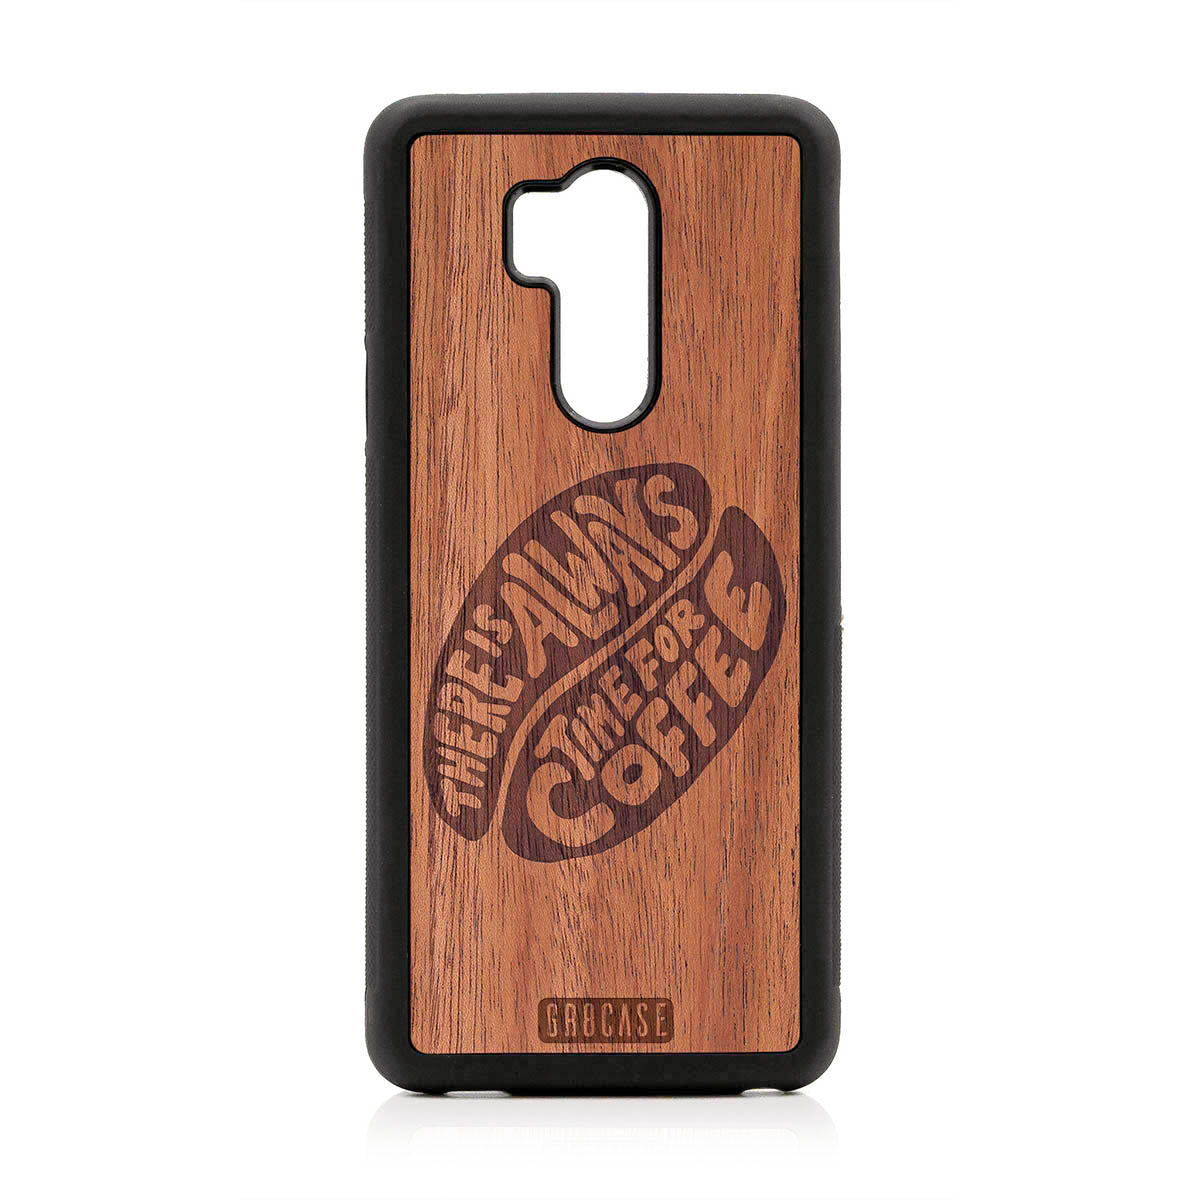 There Is Always Time For Coffee Design Wood Case For LG G7 ThinQ